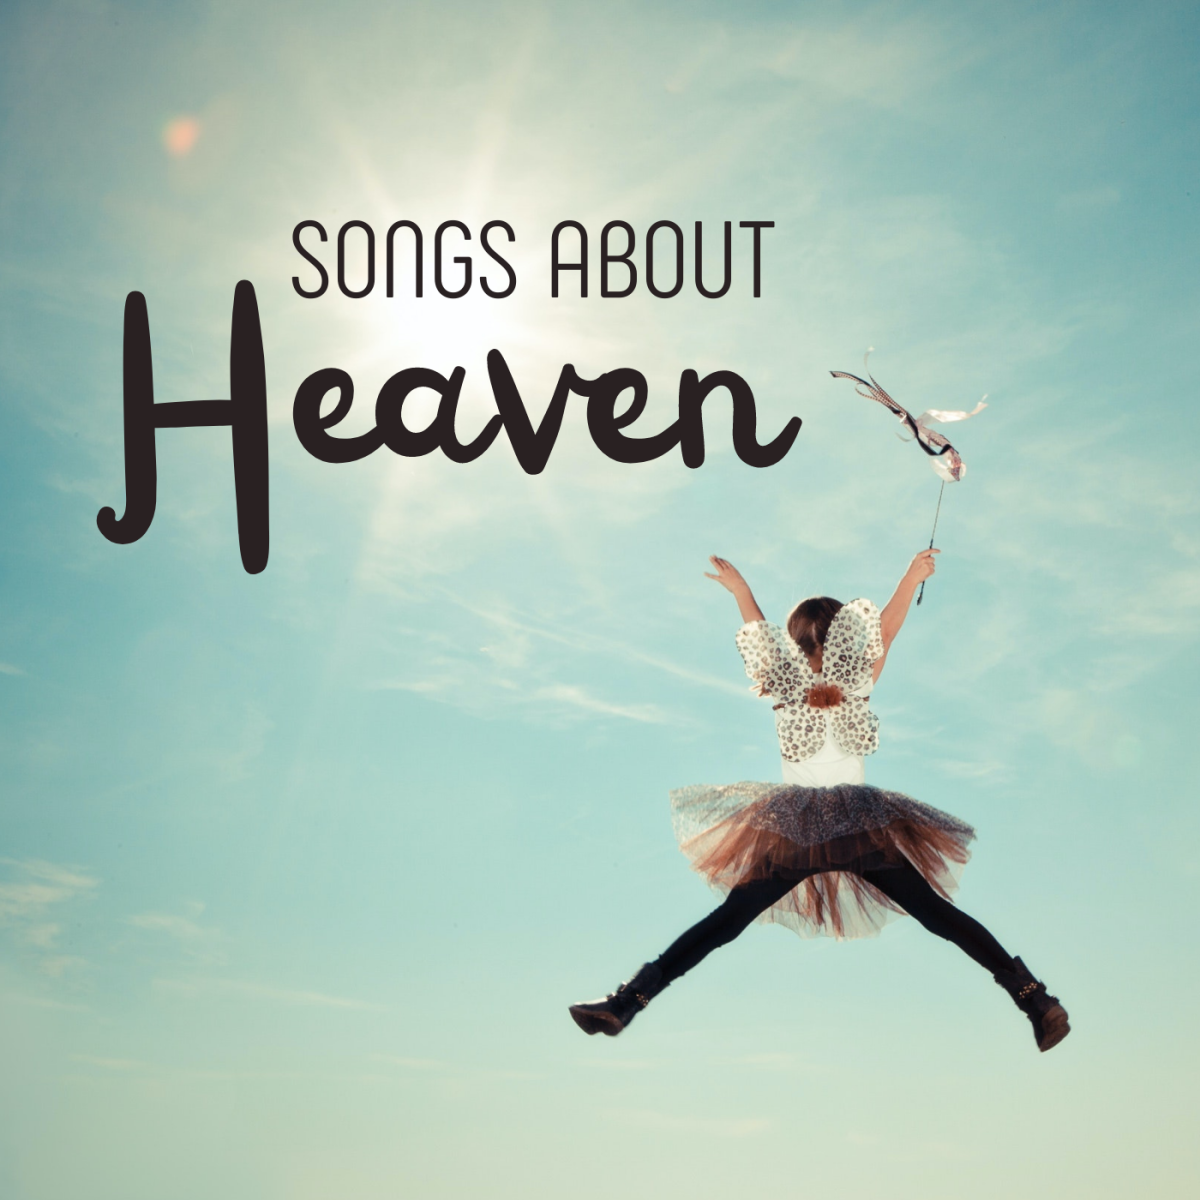 Take a stairway to heaven or knock on heaven's door with this long list of songs for your playlist.